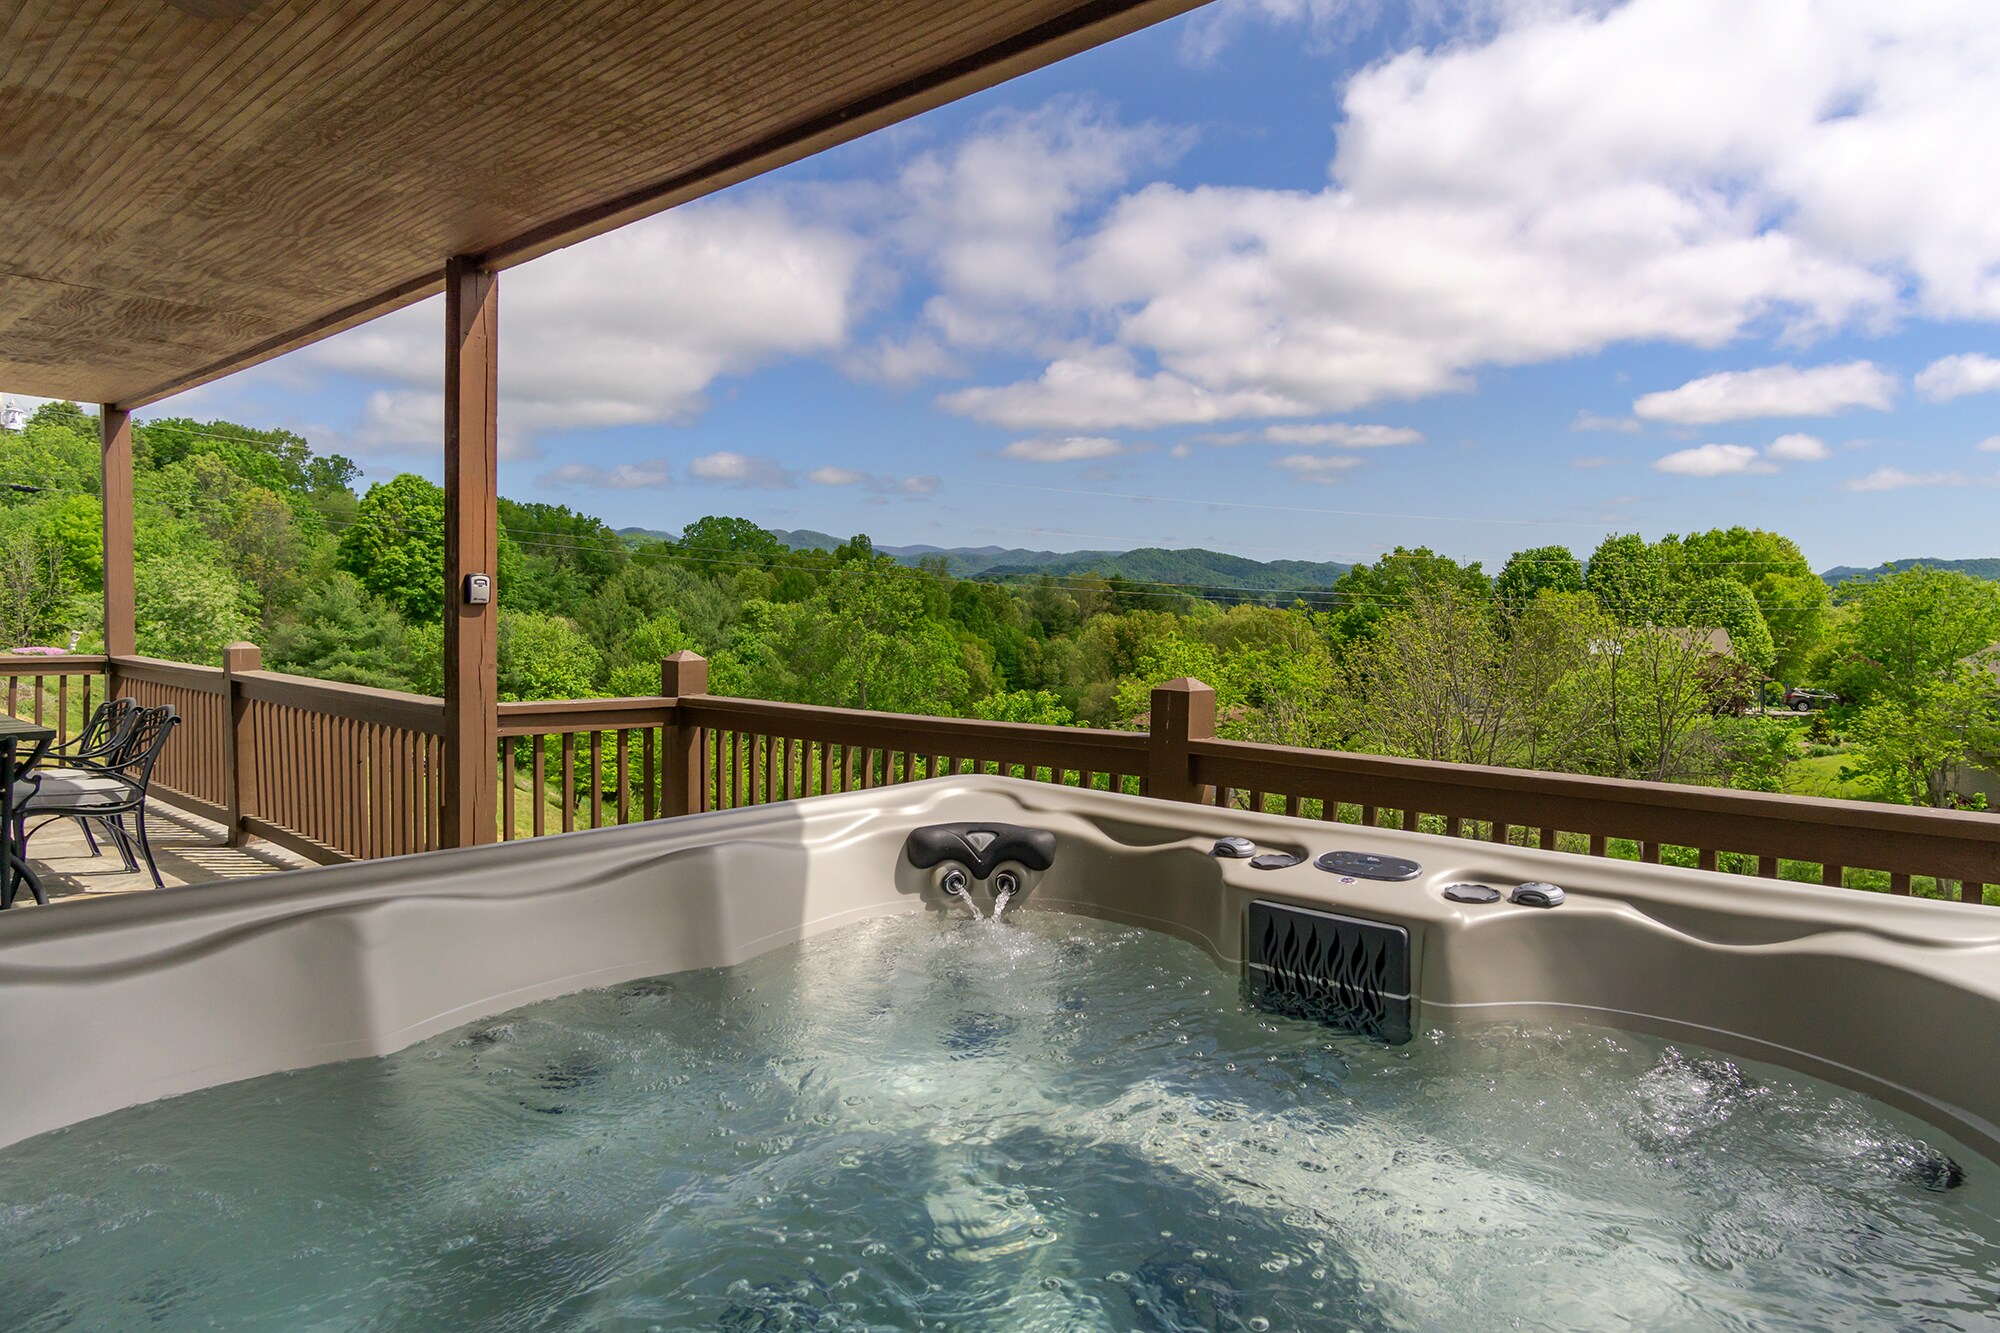 Relax and restore while pondering the breathtaking views of the Blue Ridge Mountains!